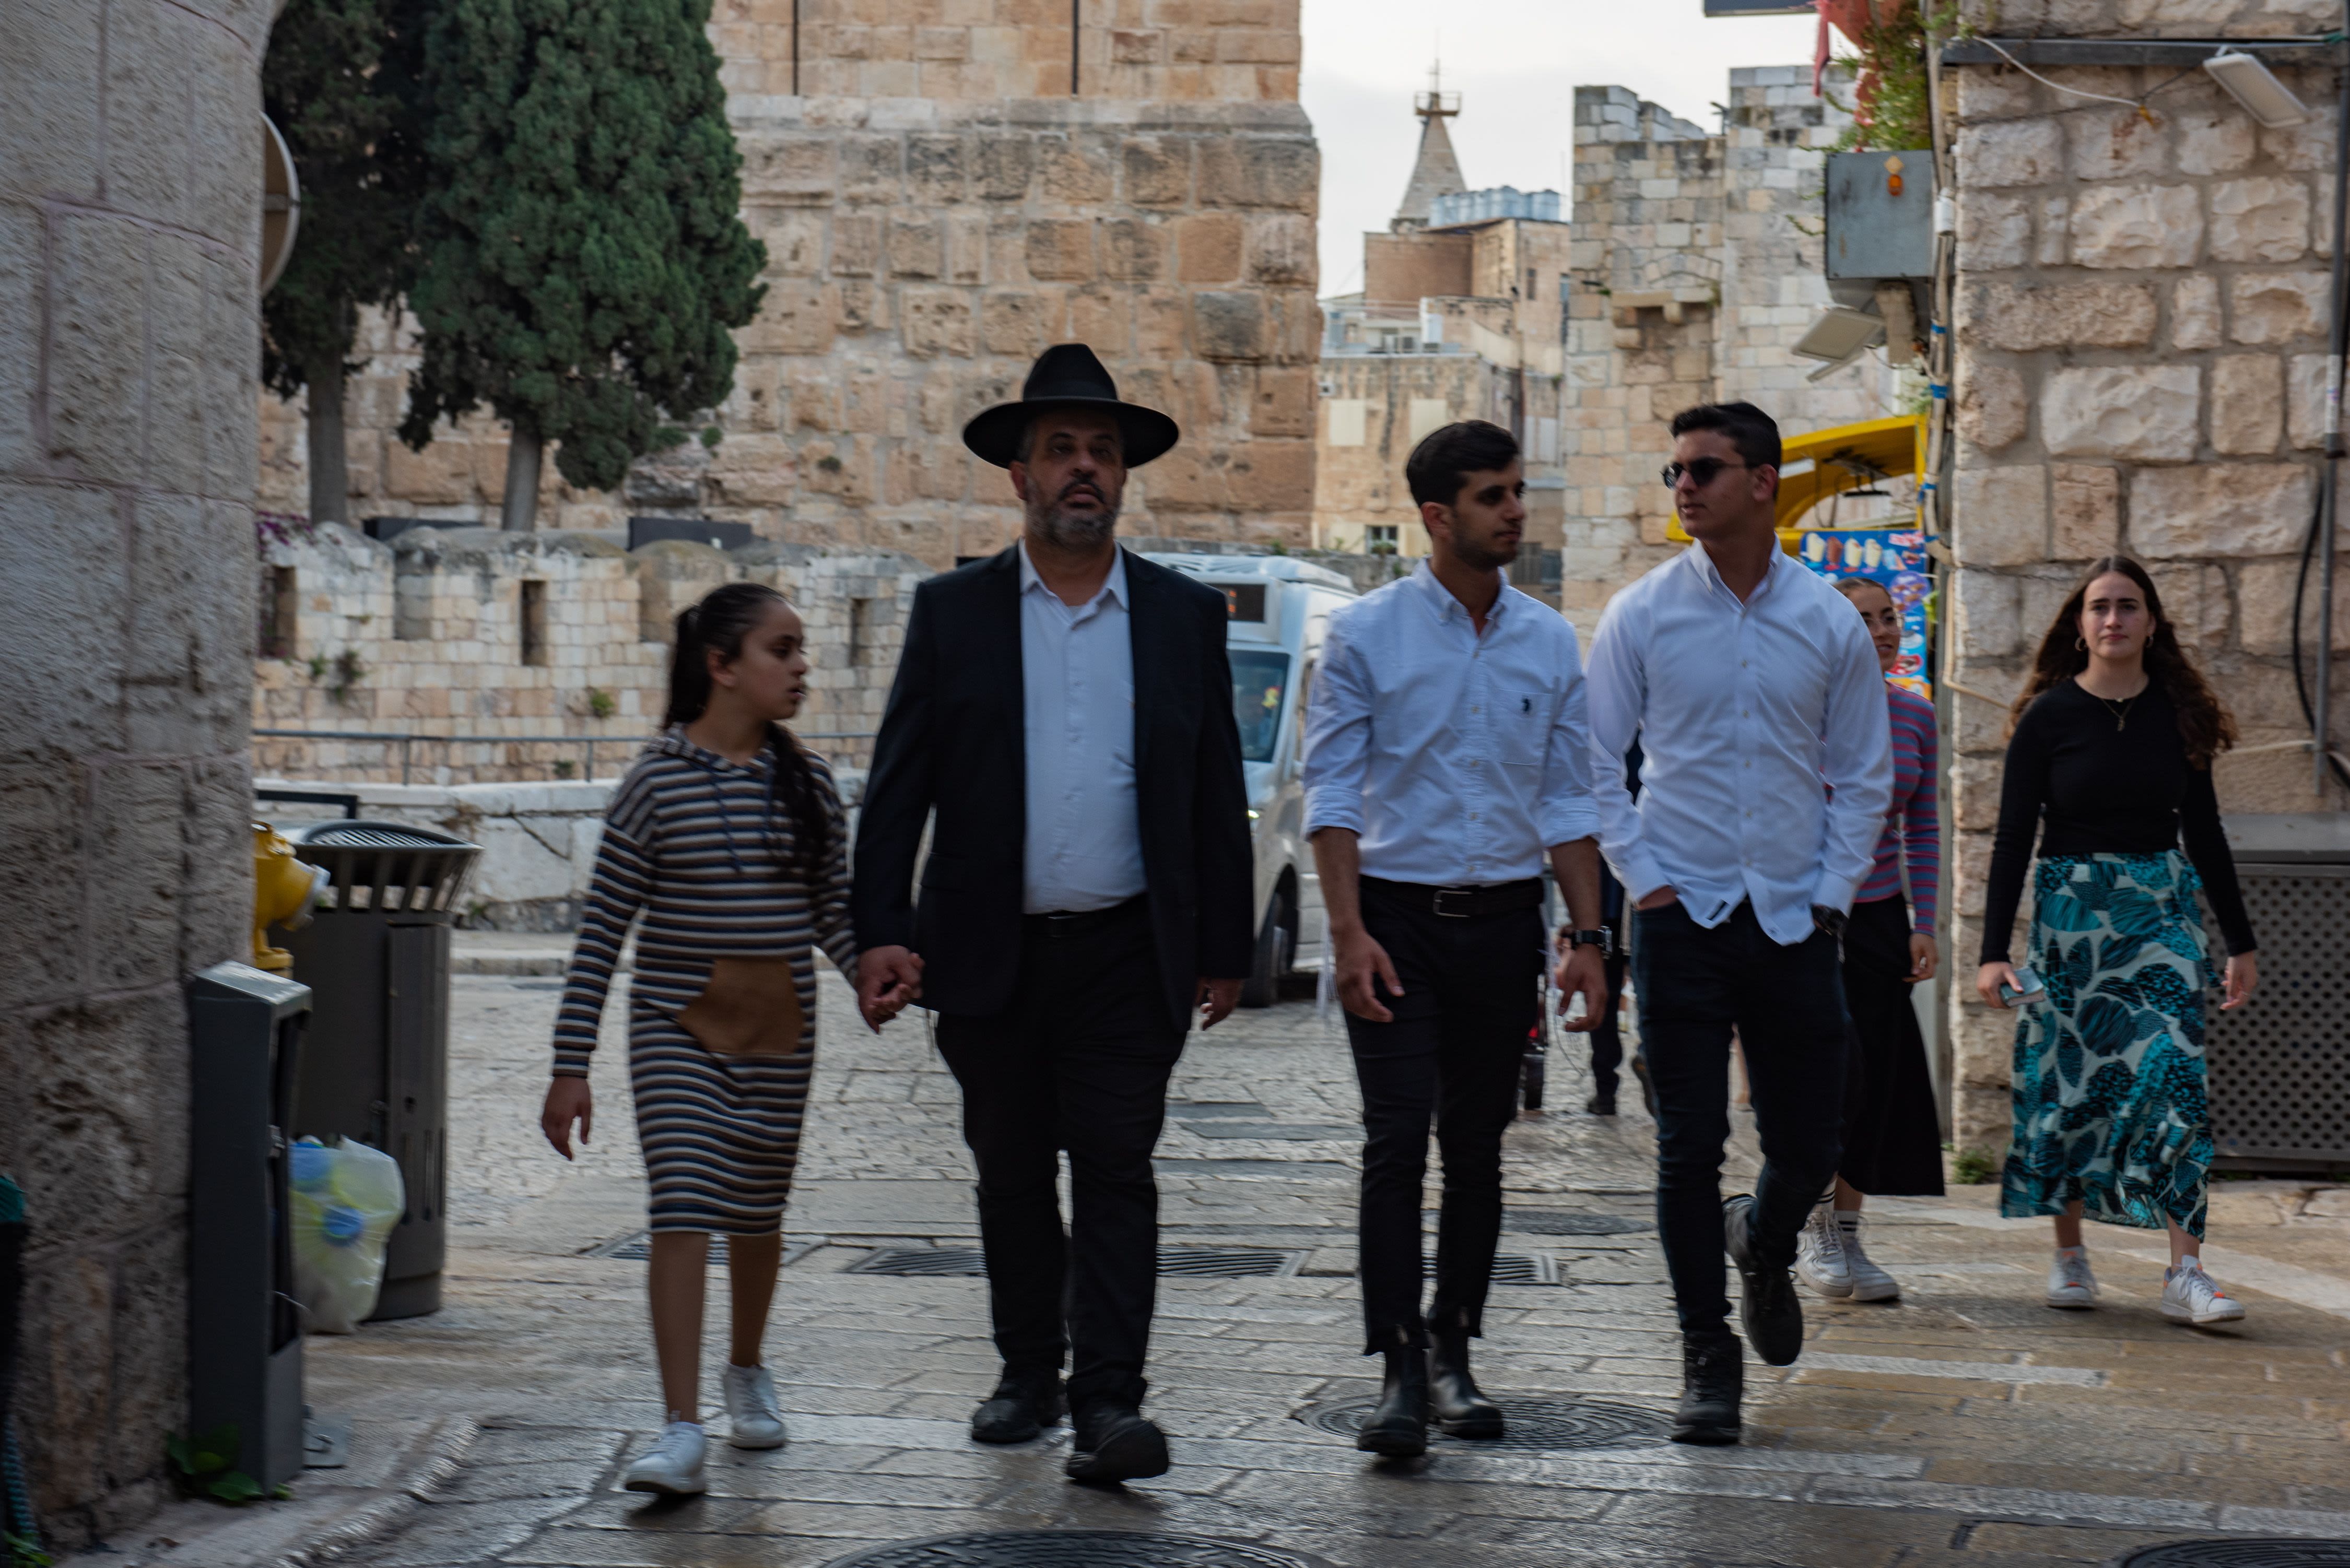 Jerusalem rabbis call on Jews to stand against spitting at Christians